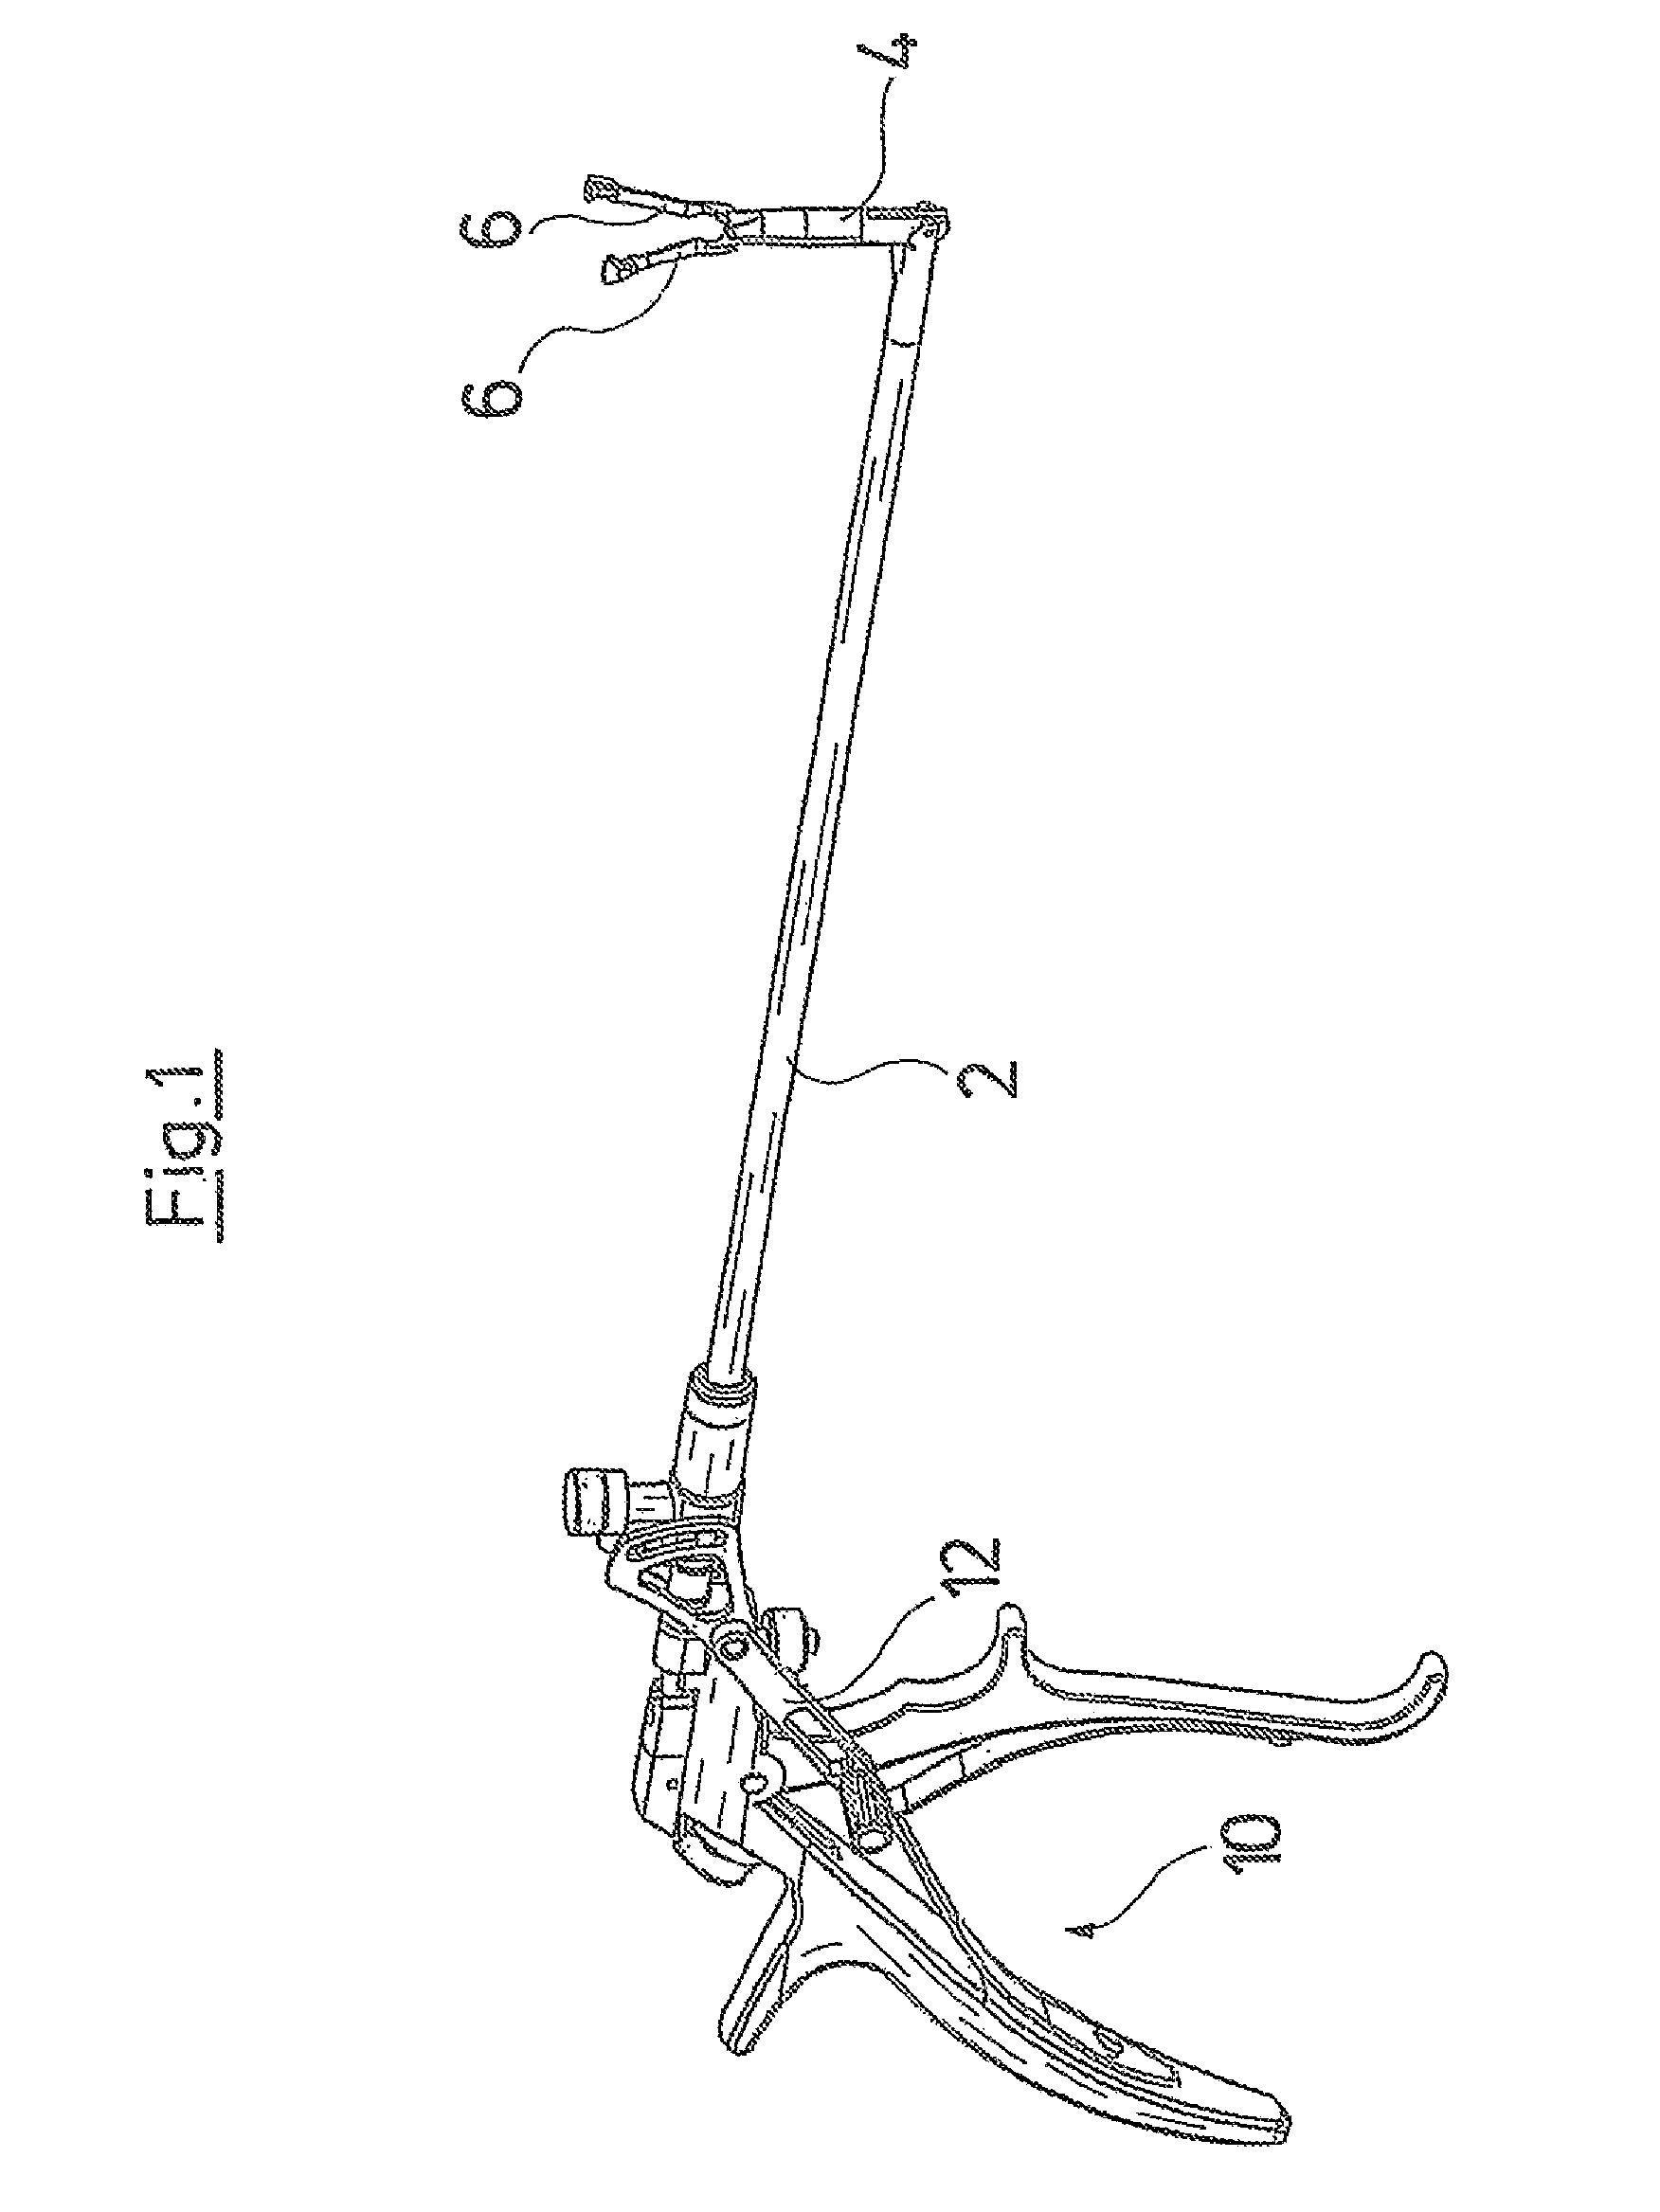 Medical instrument with multi-joint arm